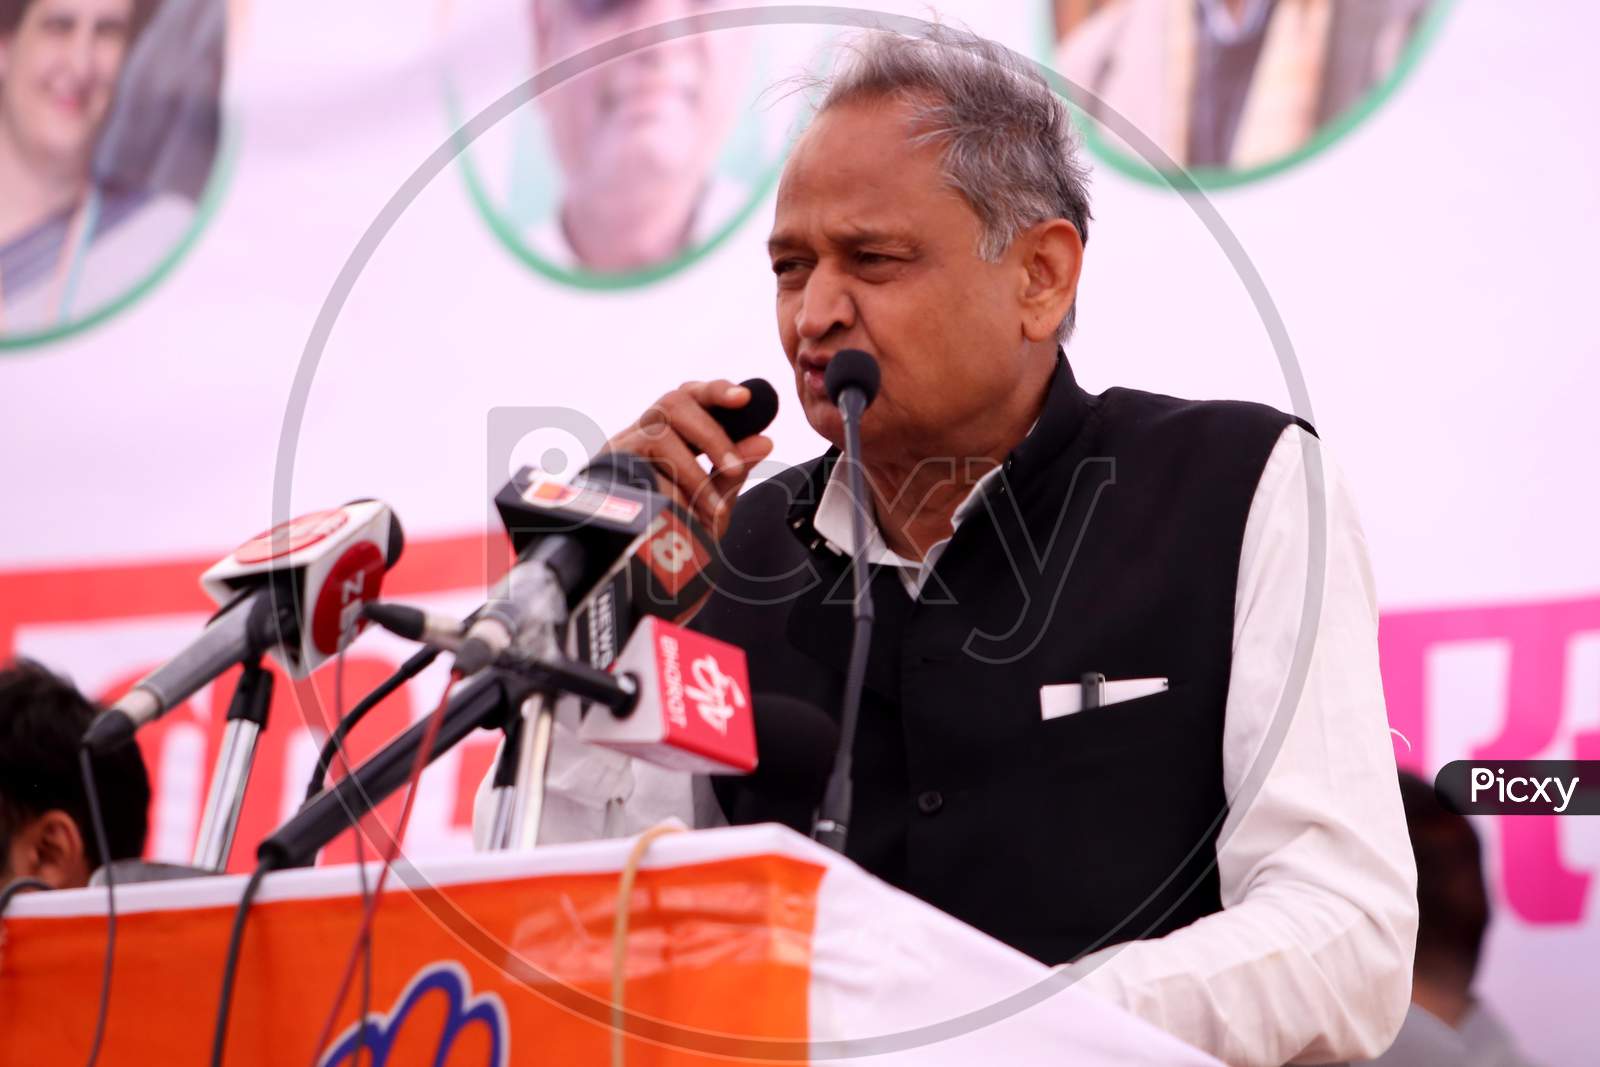 Ashok Gehlot, Chief Minister of Rajasthan delivers a speech in a campaign rally in Pushkar, Rajasthan on April 16, 2019